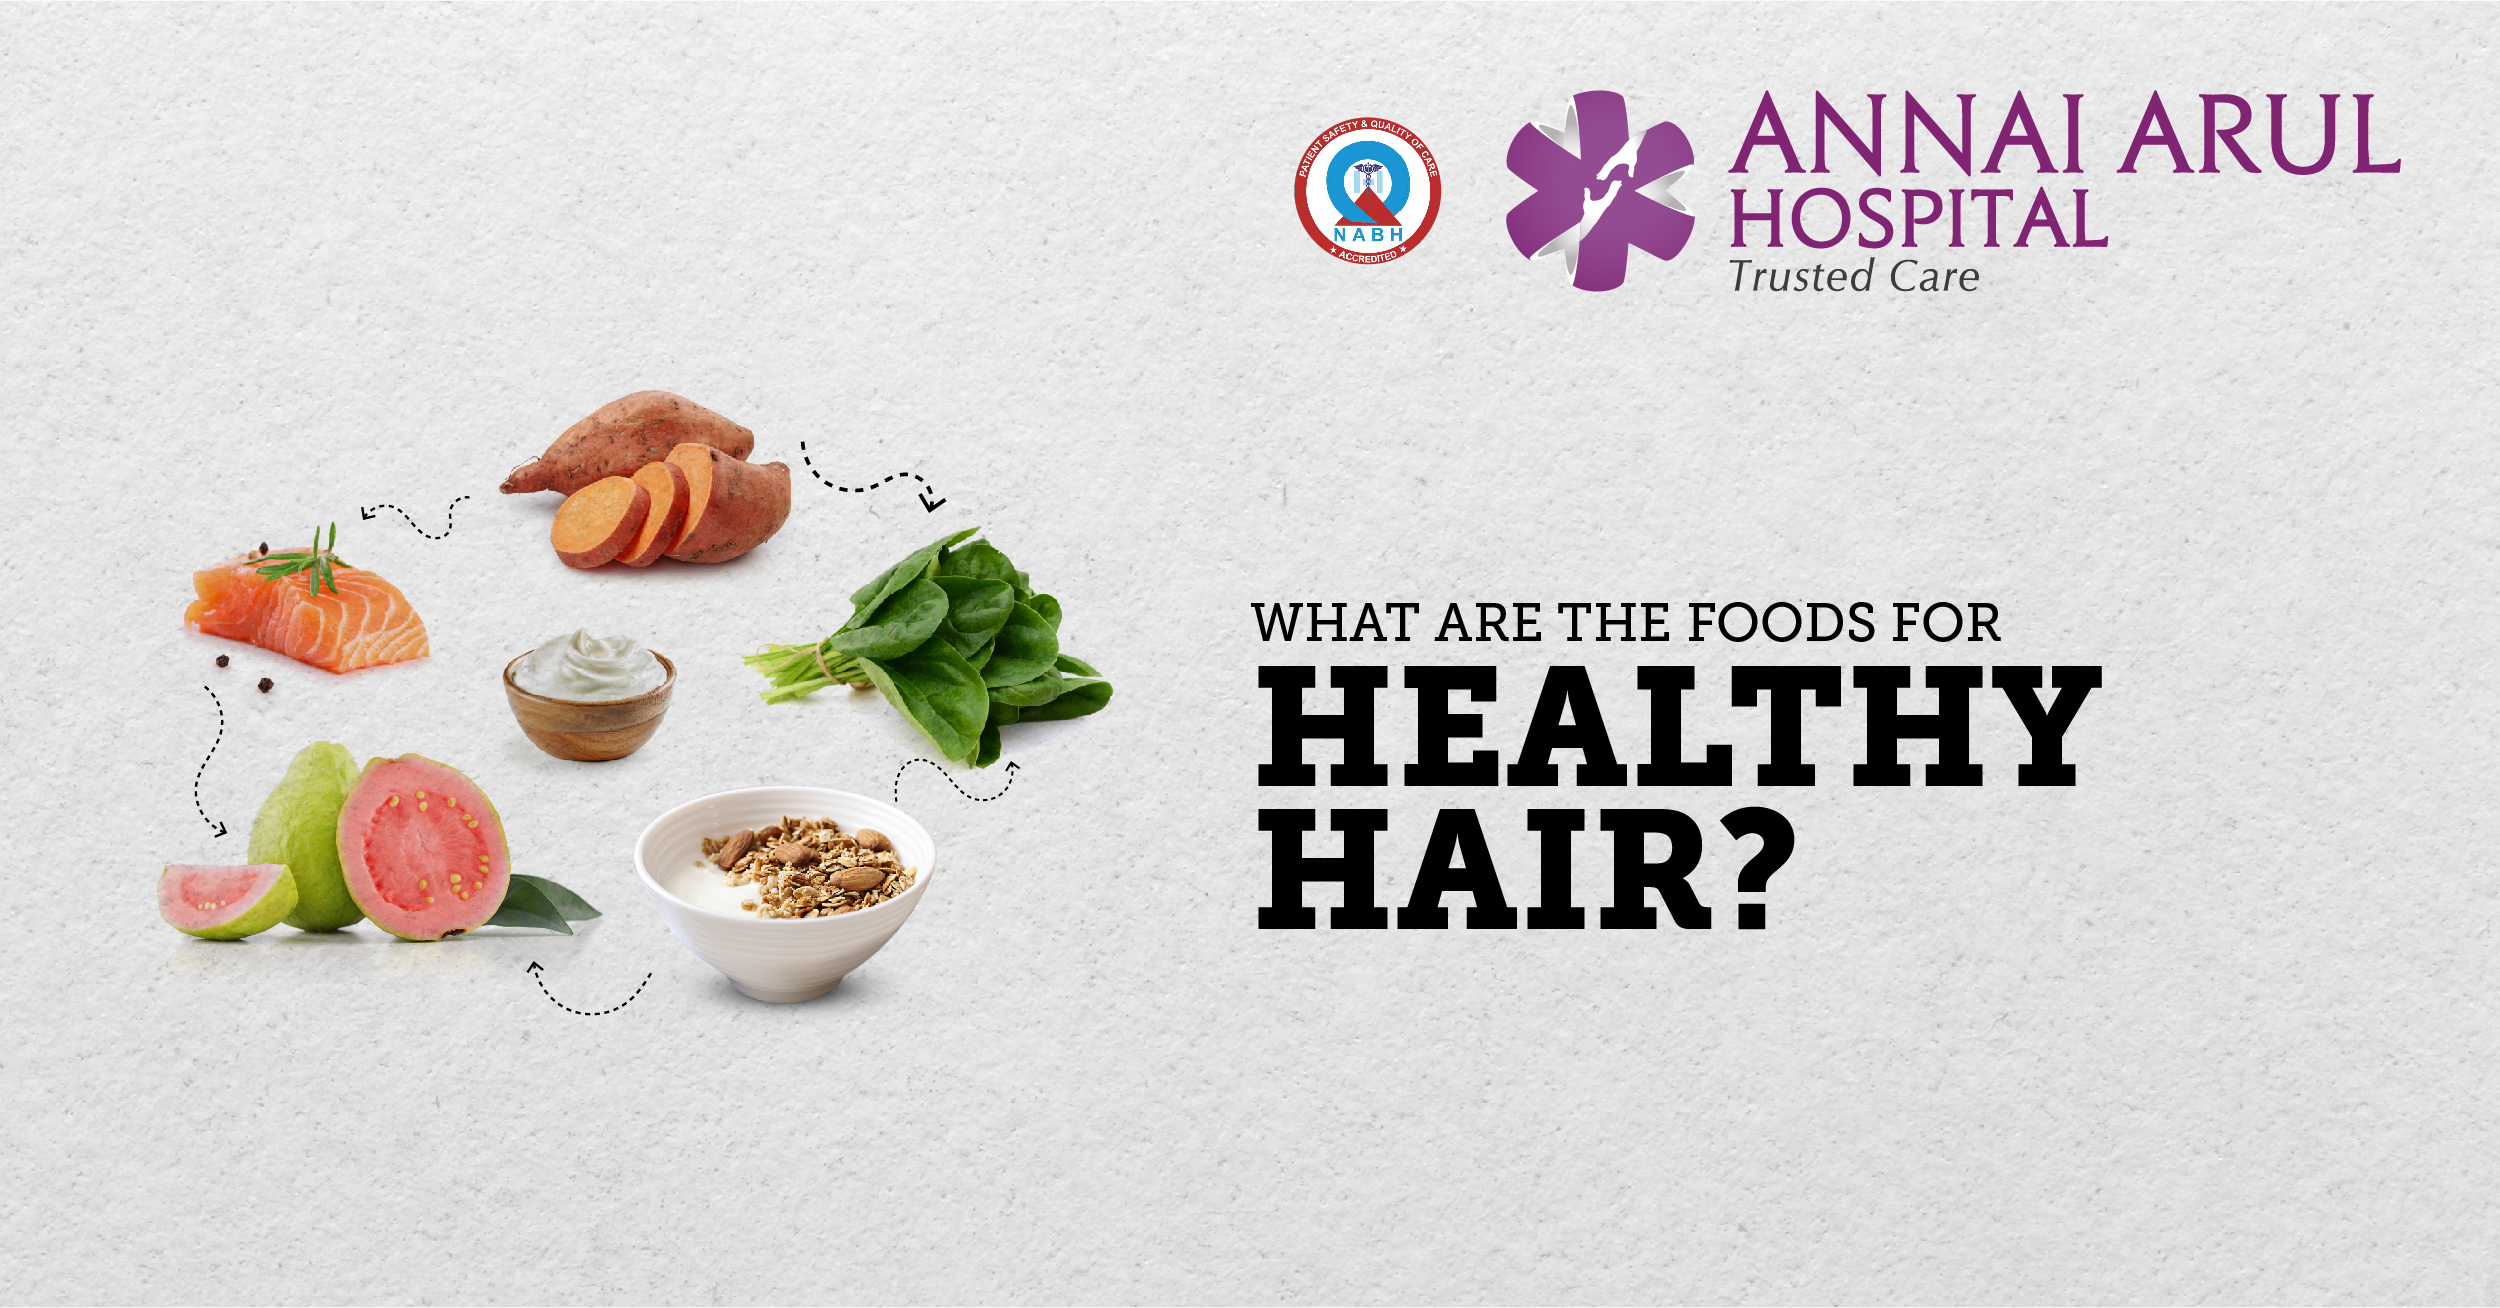 WHAT ARE THE FOODS FOR HEALTHY HAIR? – Multispeciality Hospitals in Chennai